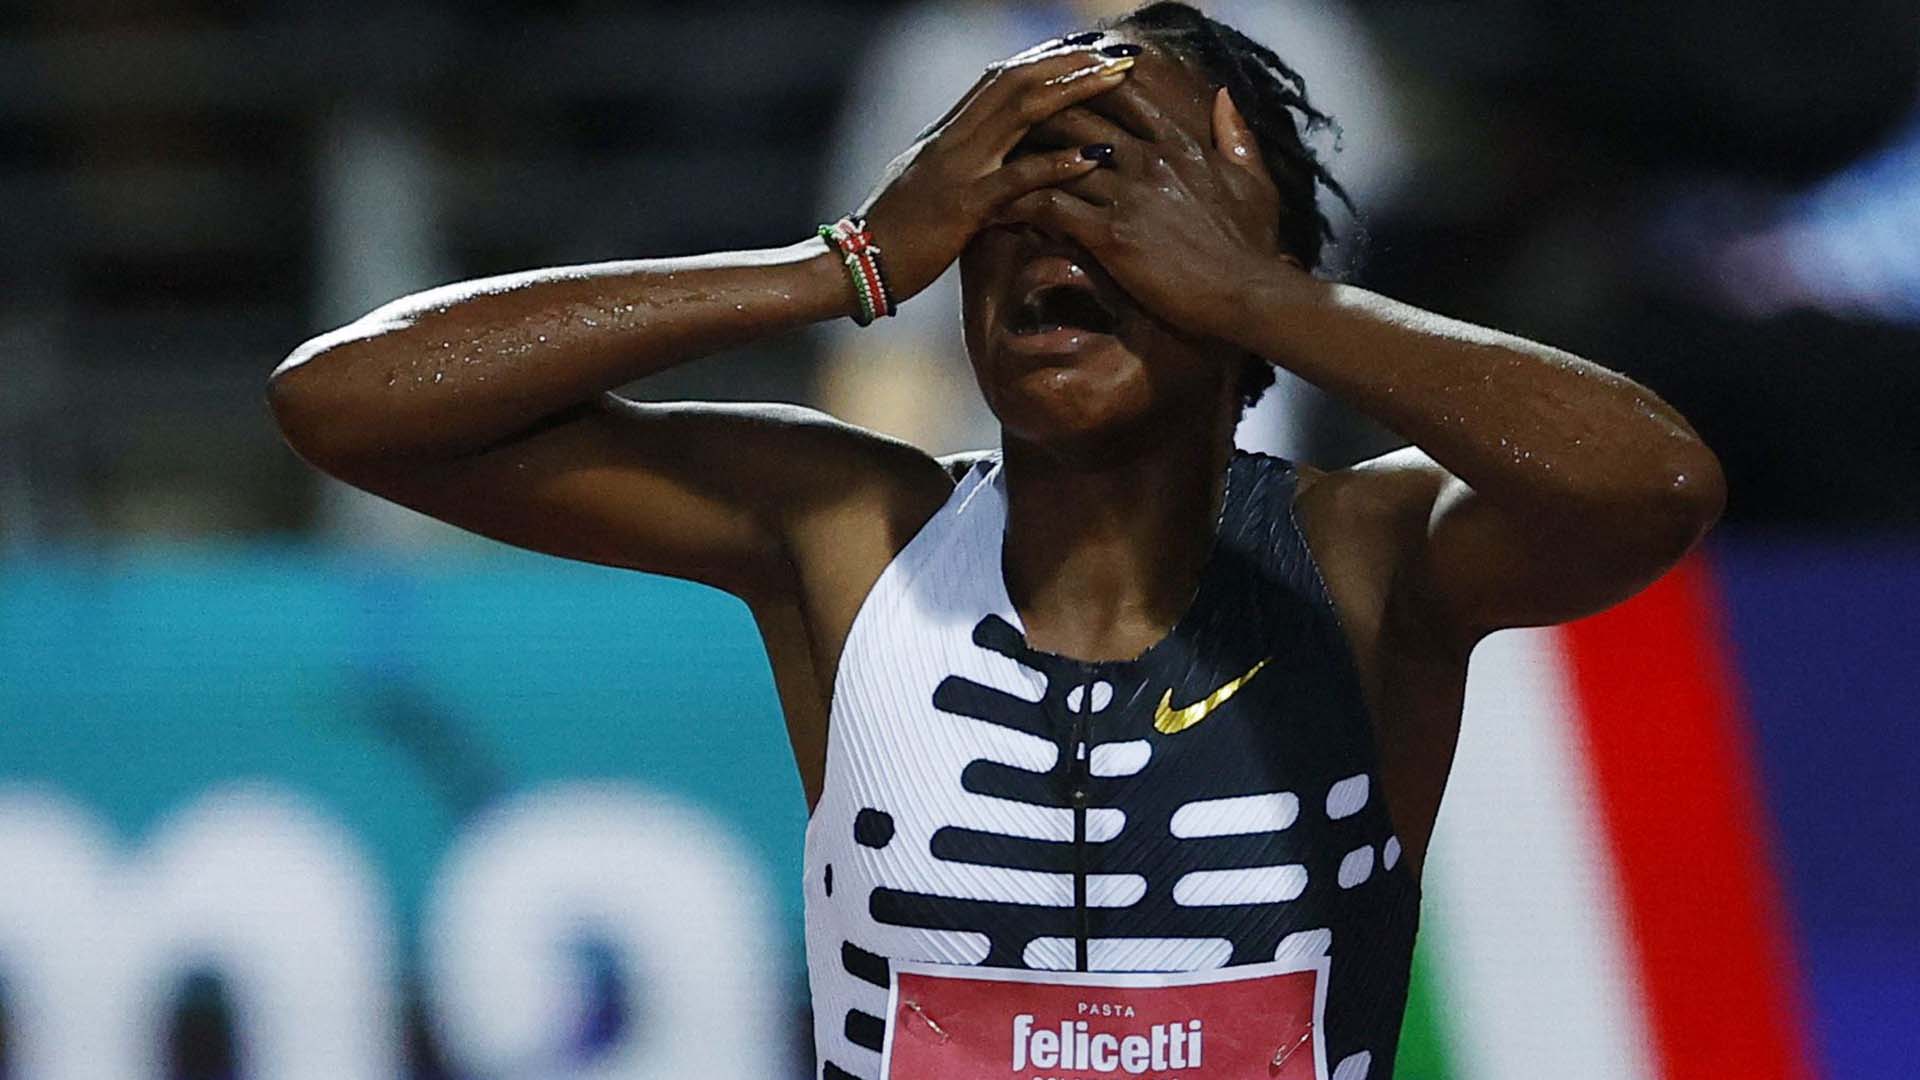 Faith Kipyegon shines in Florence: new world record in 1500 meters